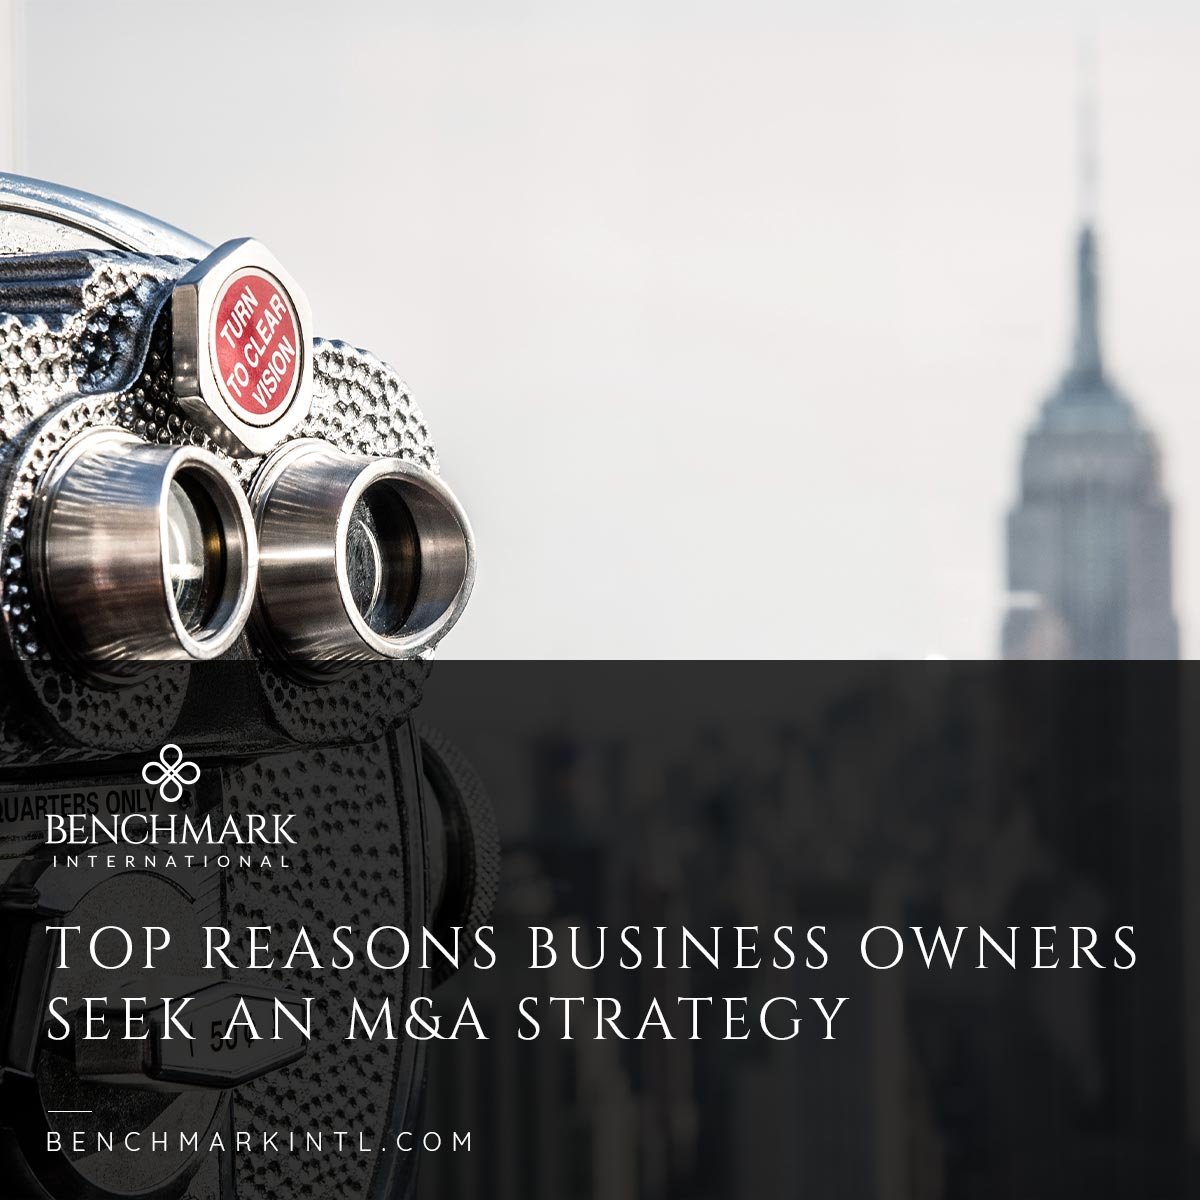 Top-Reasons-Business-Owners-Seek-An-M&A-Strategy_Social